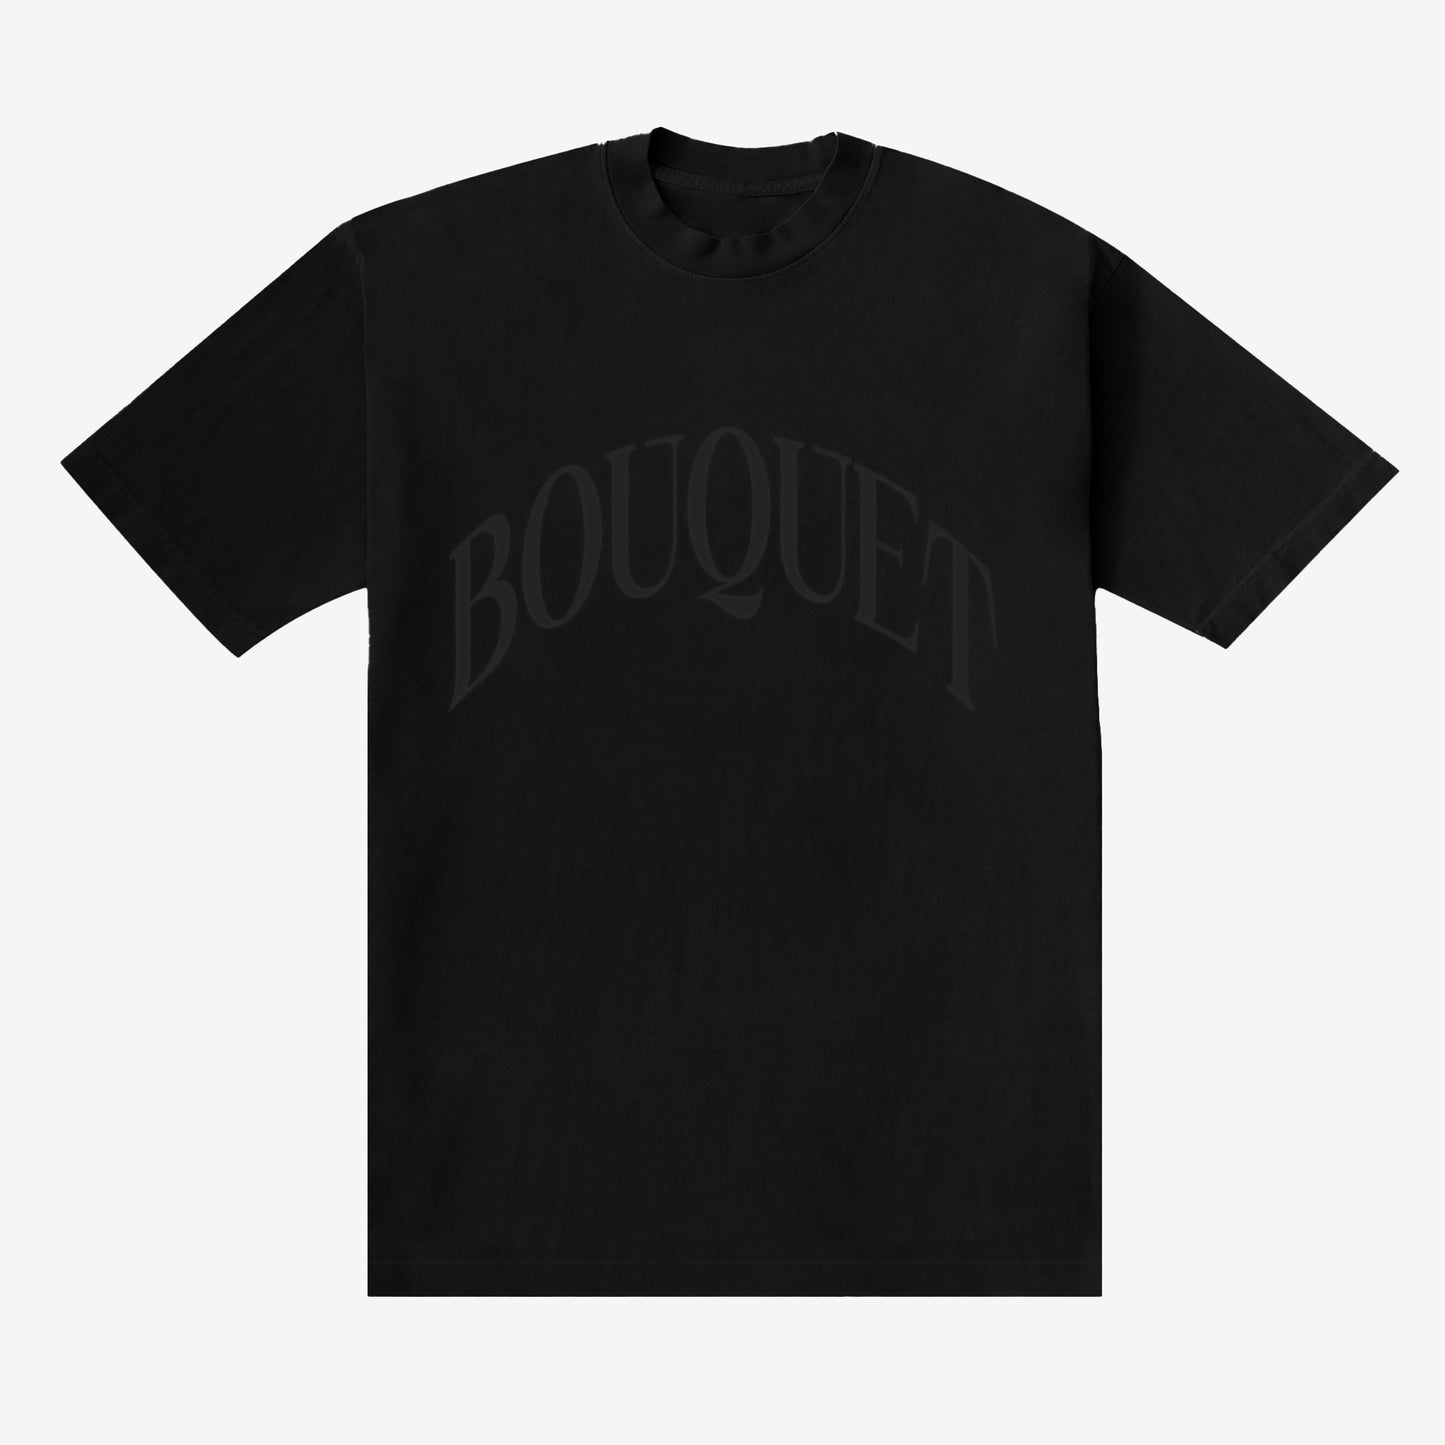 The Bouquet Classic Tee